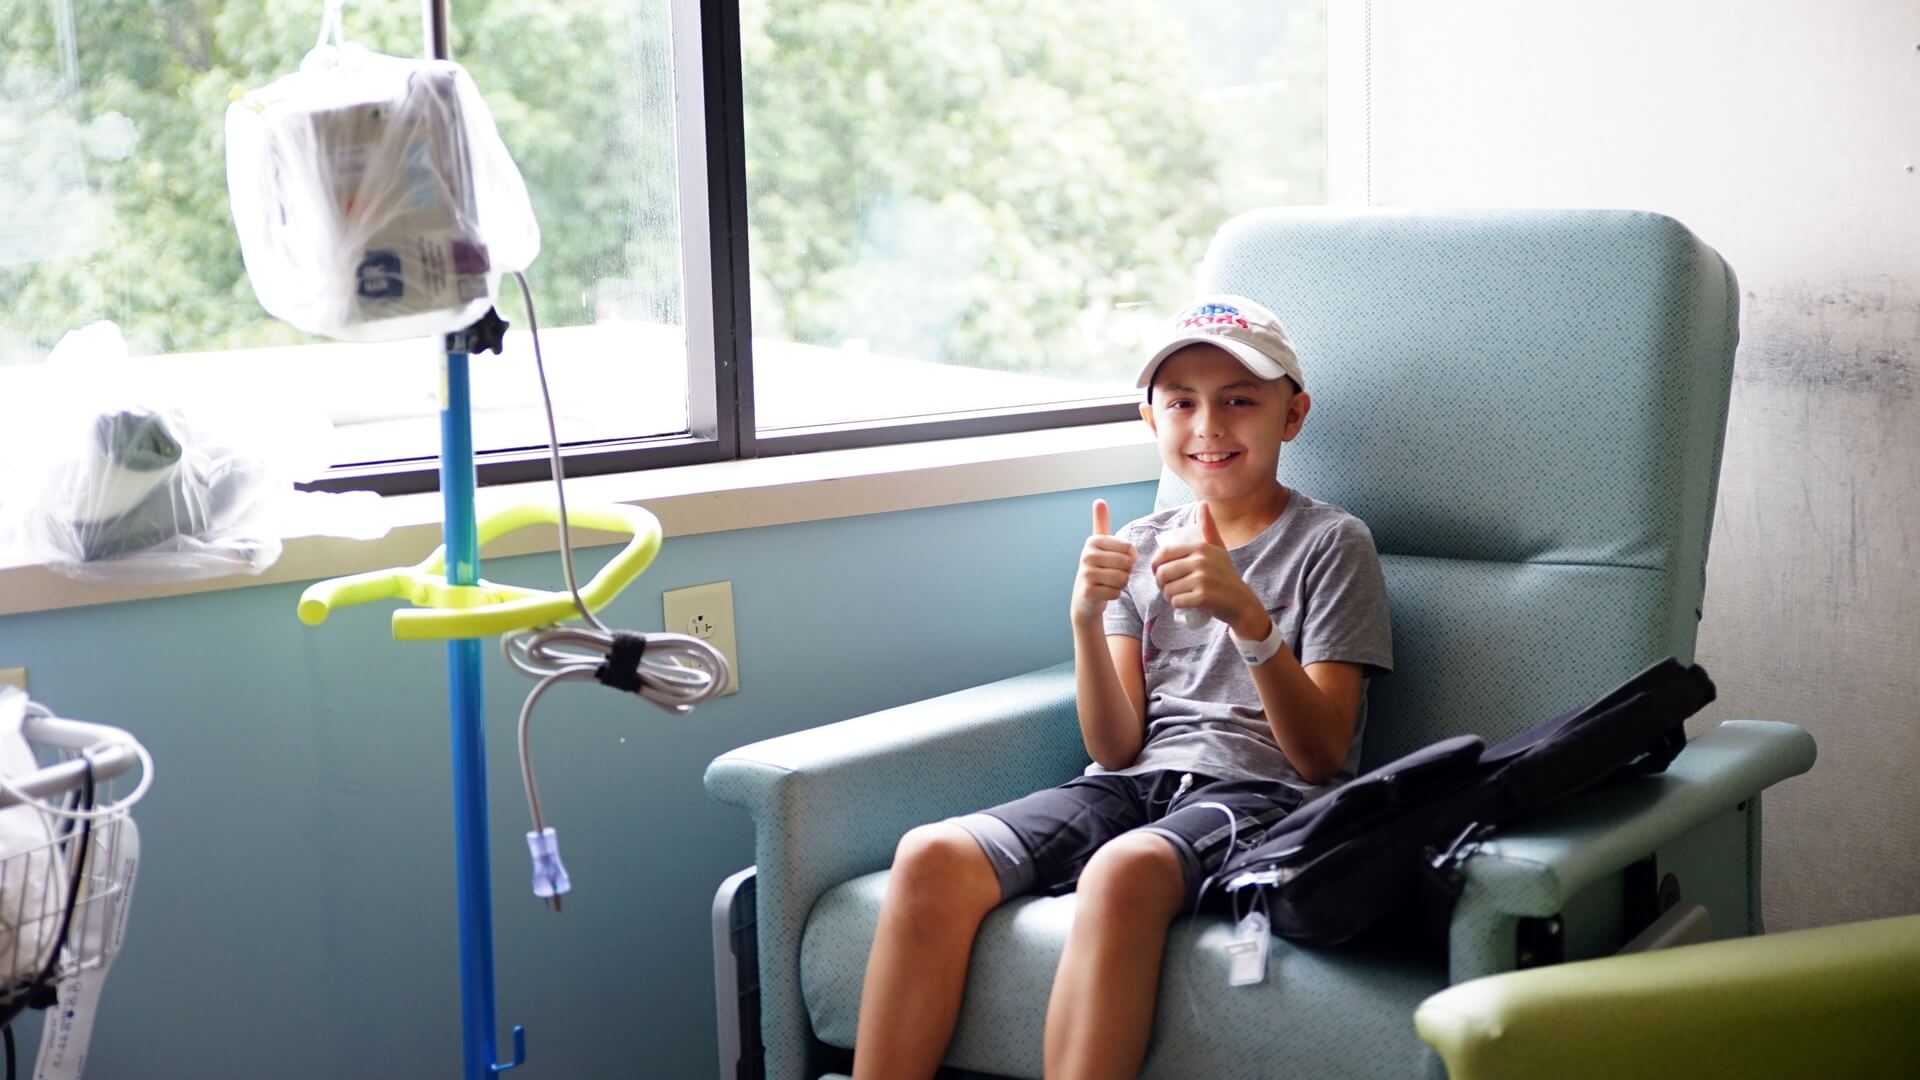 "No one would ever describe chemotherapy as easy. But a new option at Levine Children's Hospital allowing young patients to complete a chemotherapy regimen at home has helped 11-year-old Alex Bogran simplify his life – and sleep in his own bed at night."